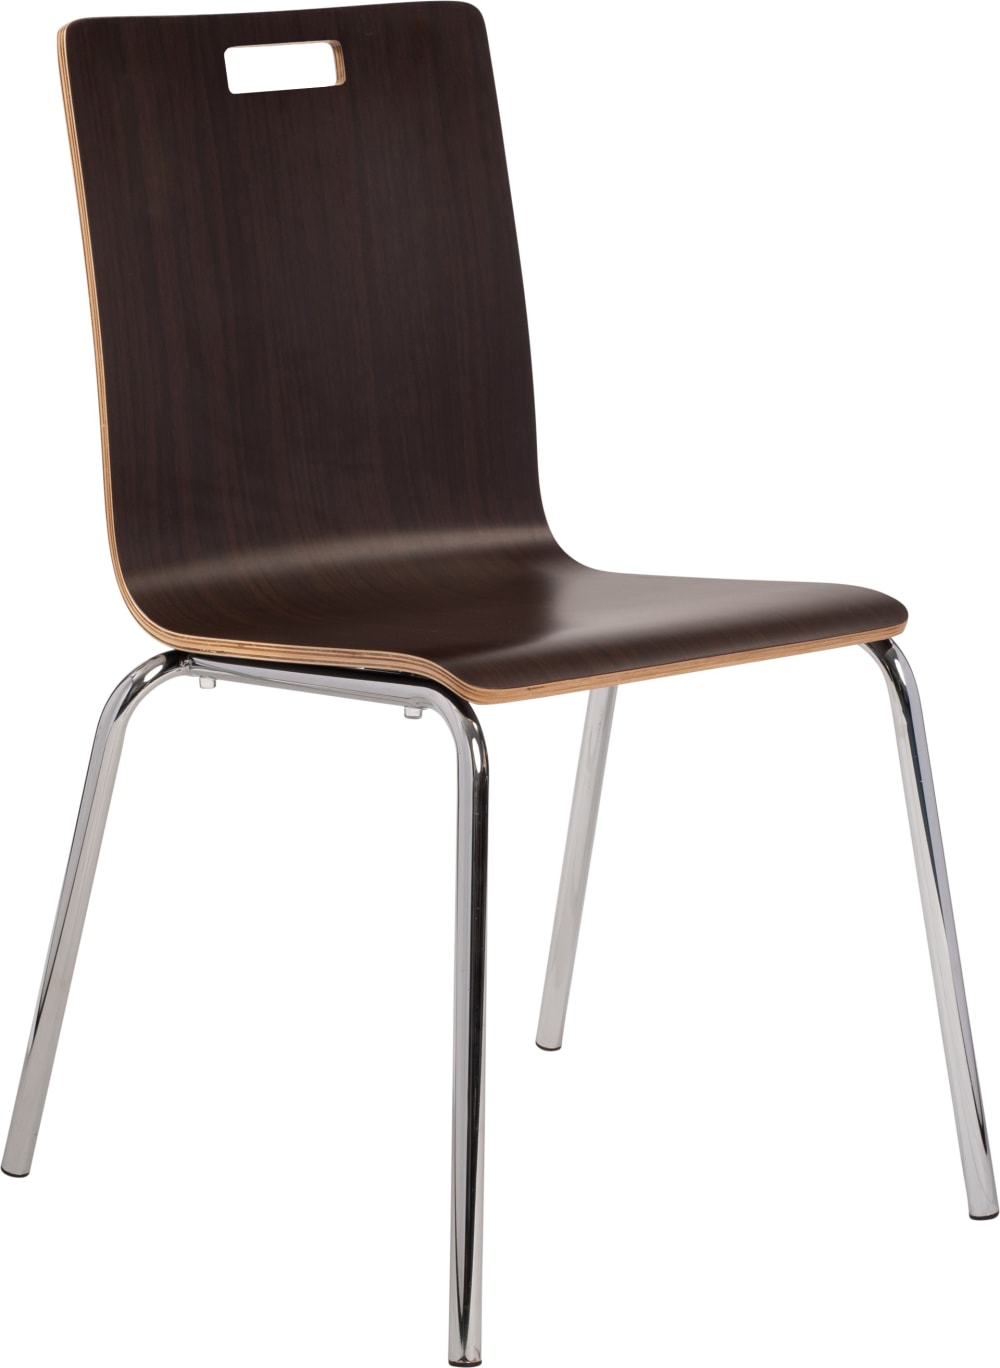 NPS BCC Series Bushwick Bentwood Cafe Stack Chair (National Public Seating NPS-BCC)